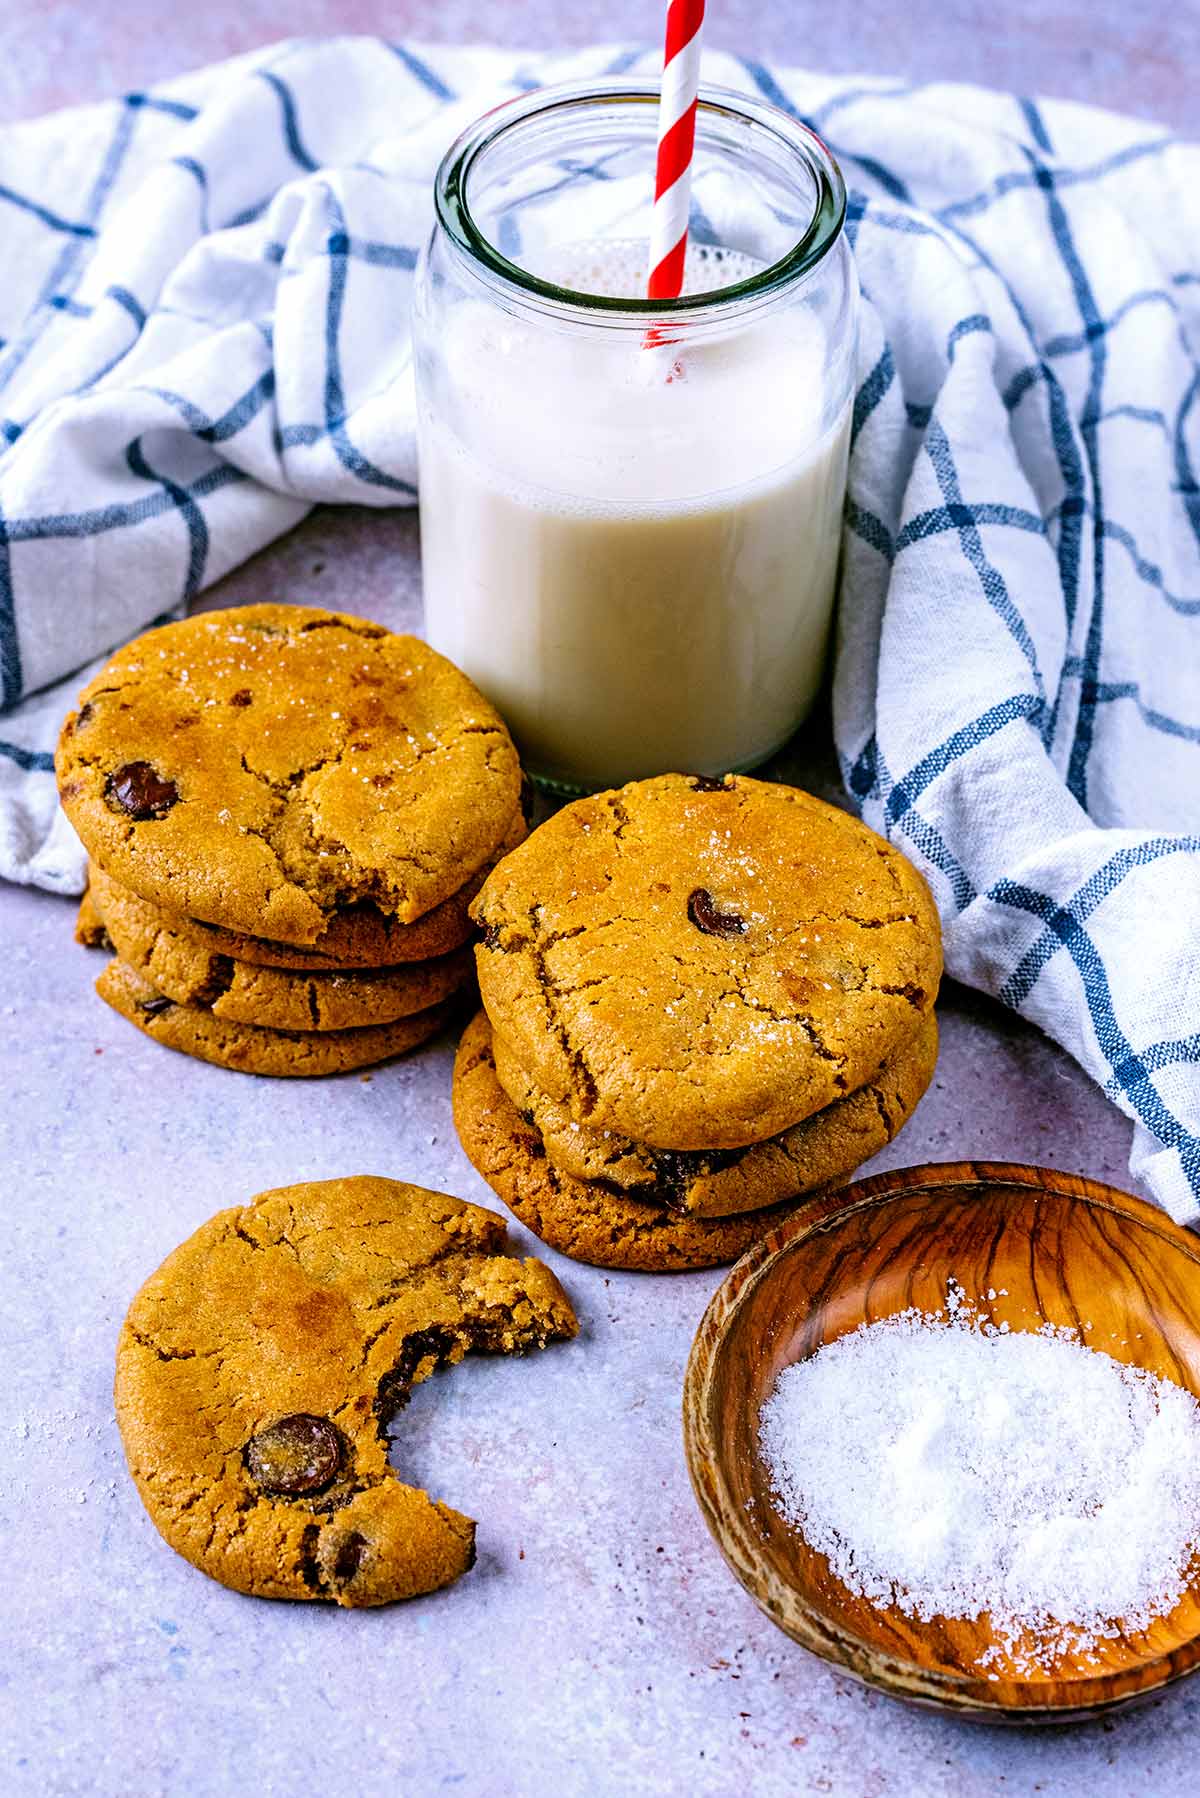 Stacks of cookies and a cookie with a bite taken out. A glass of milk is next to them.